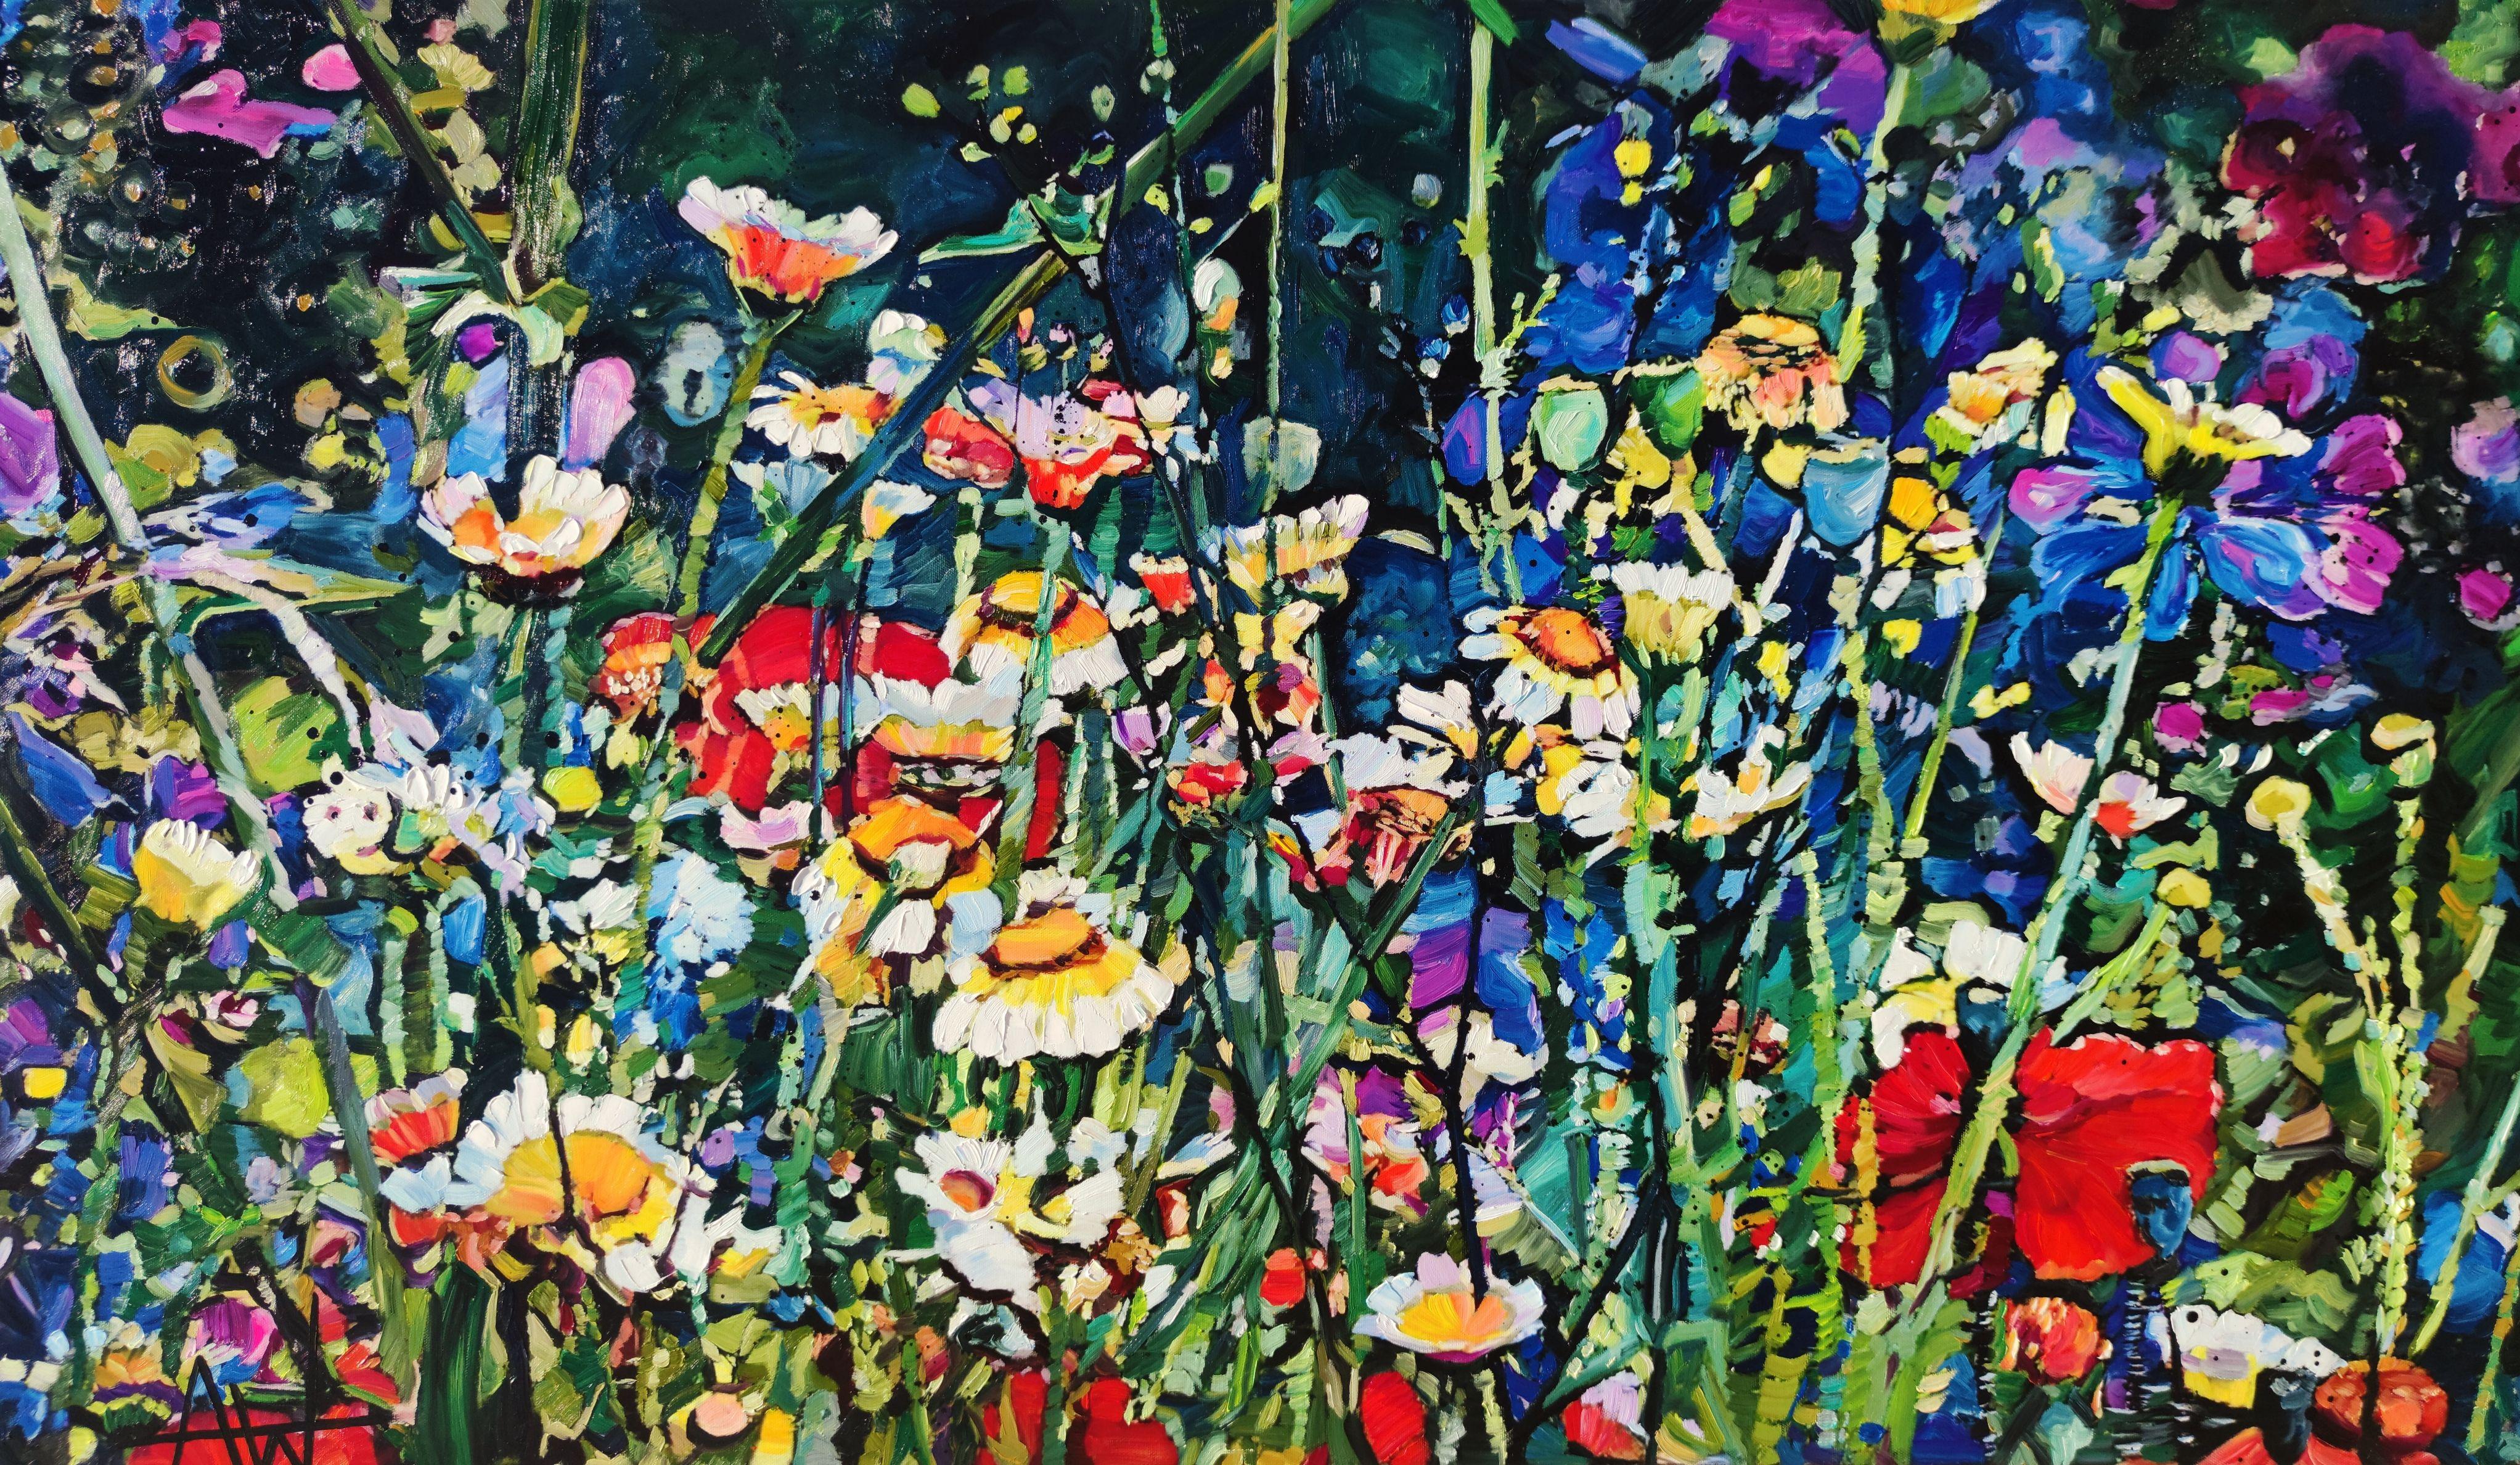 Aria, oil on canvas, 120 x 70 x 3 cm Aria, a summer song on a gentle breeze. Wildflowers dance to a floral melody. Summer wildflowers represent the beauty of nature and the perfection of creation. To thrive in the harshest conditions, to survive and